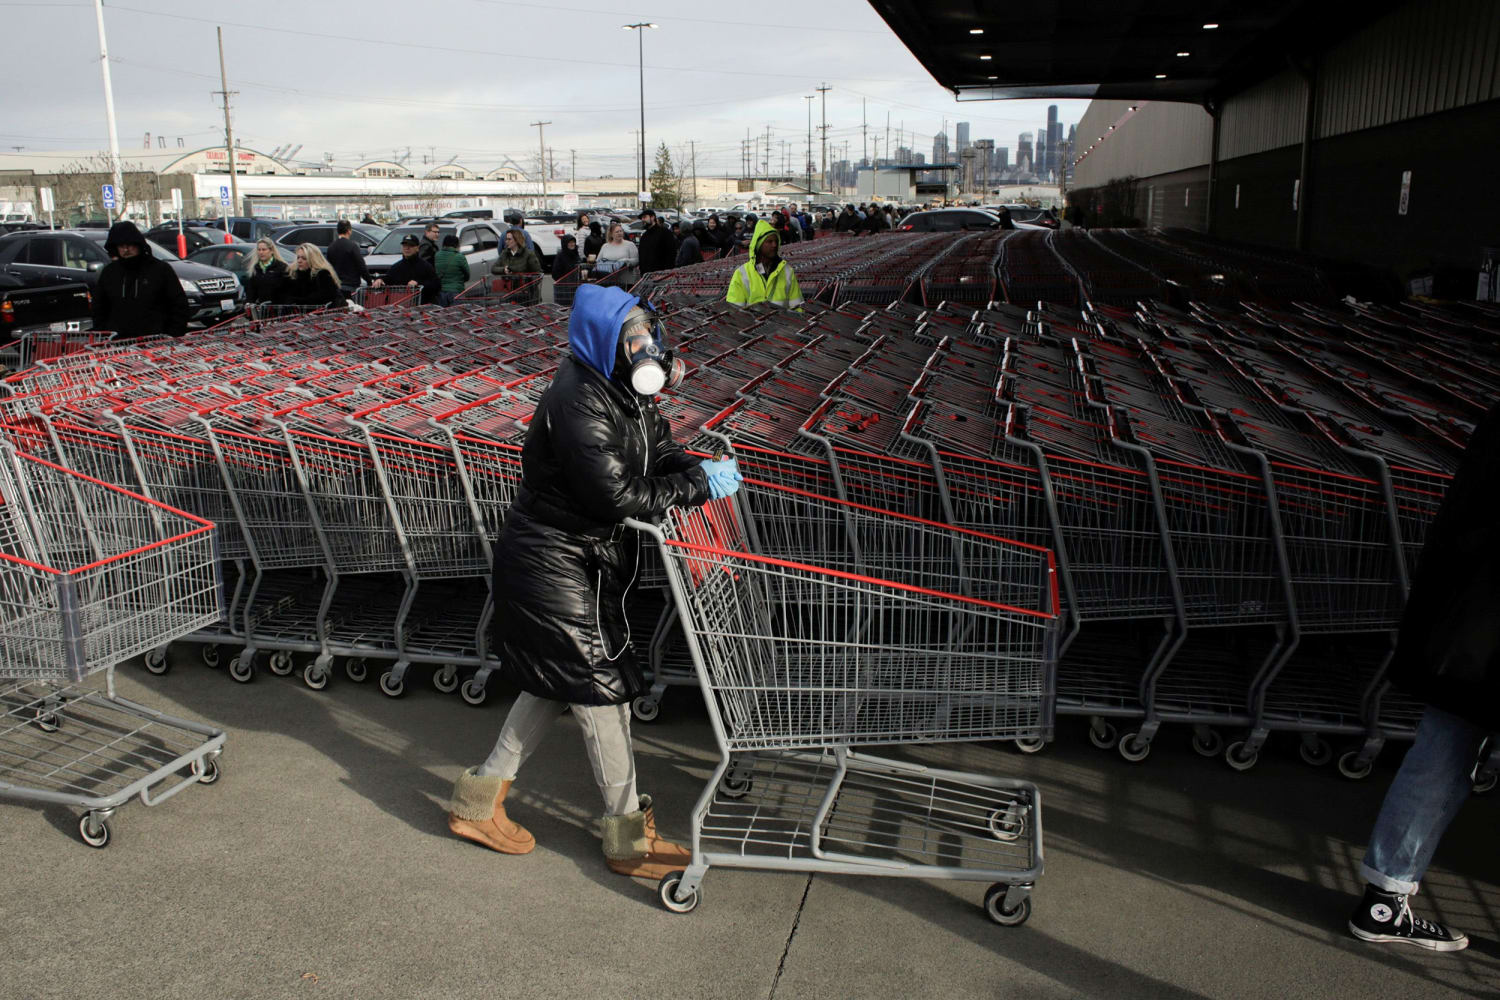 Black Friday in a Pandemic Means Fewer Shoppers, Fewer Deals - WSJ